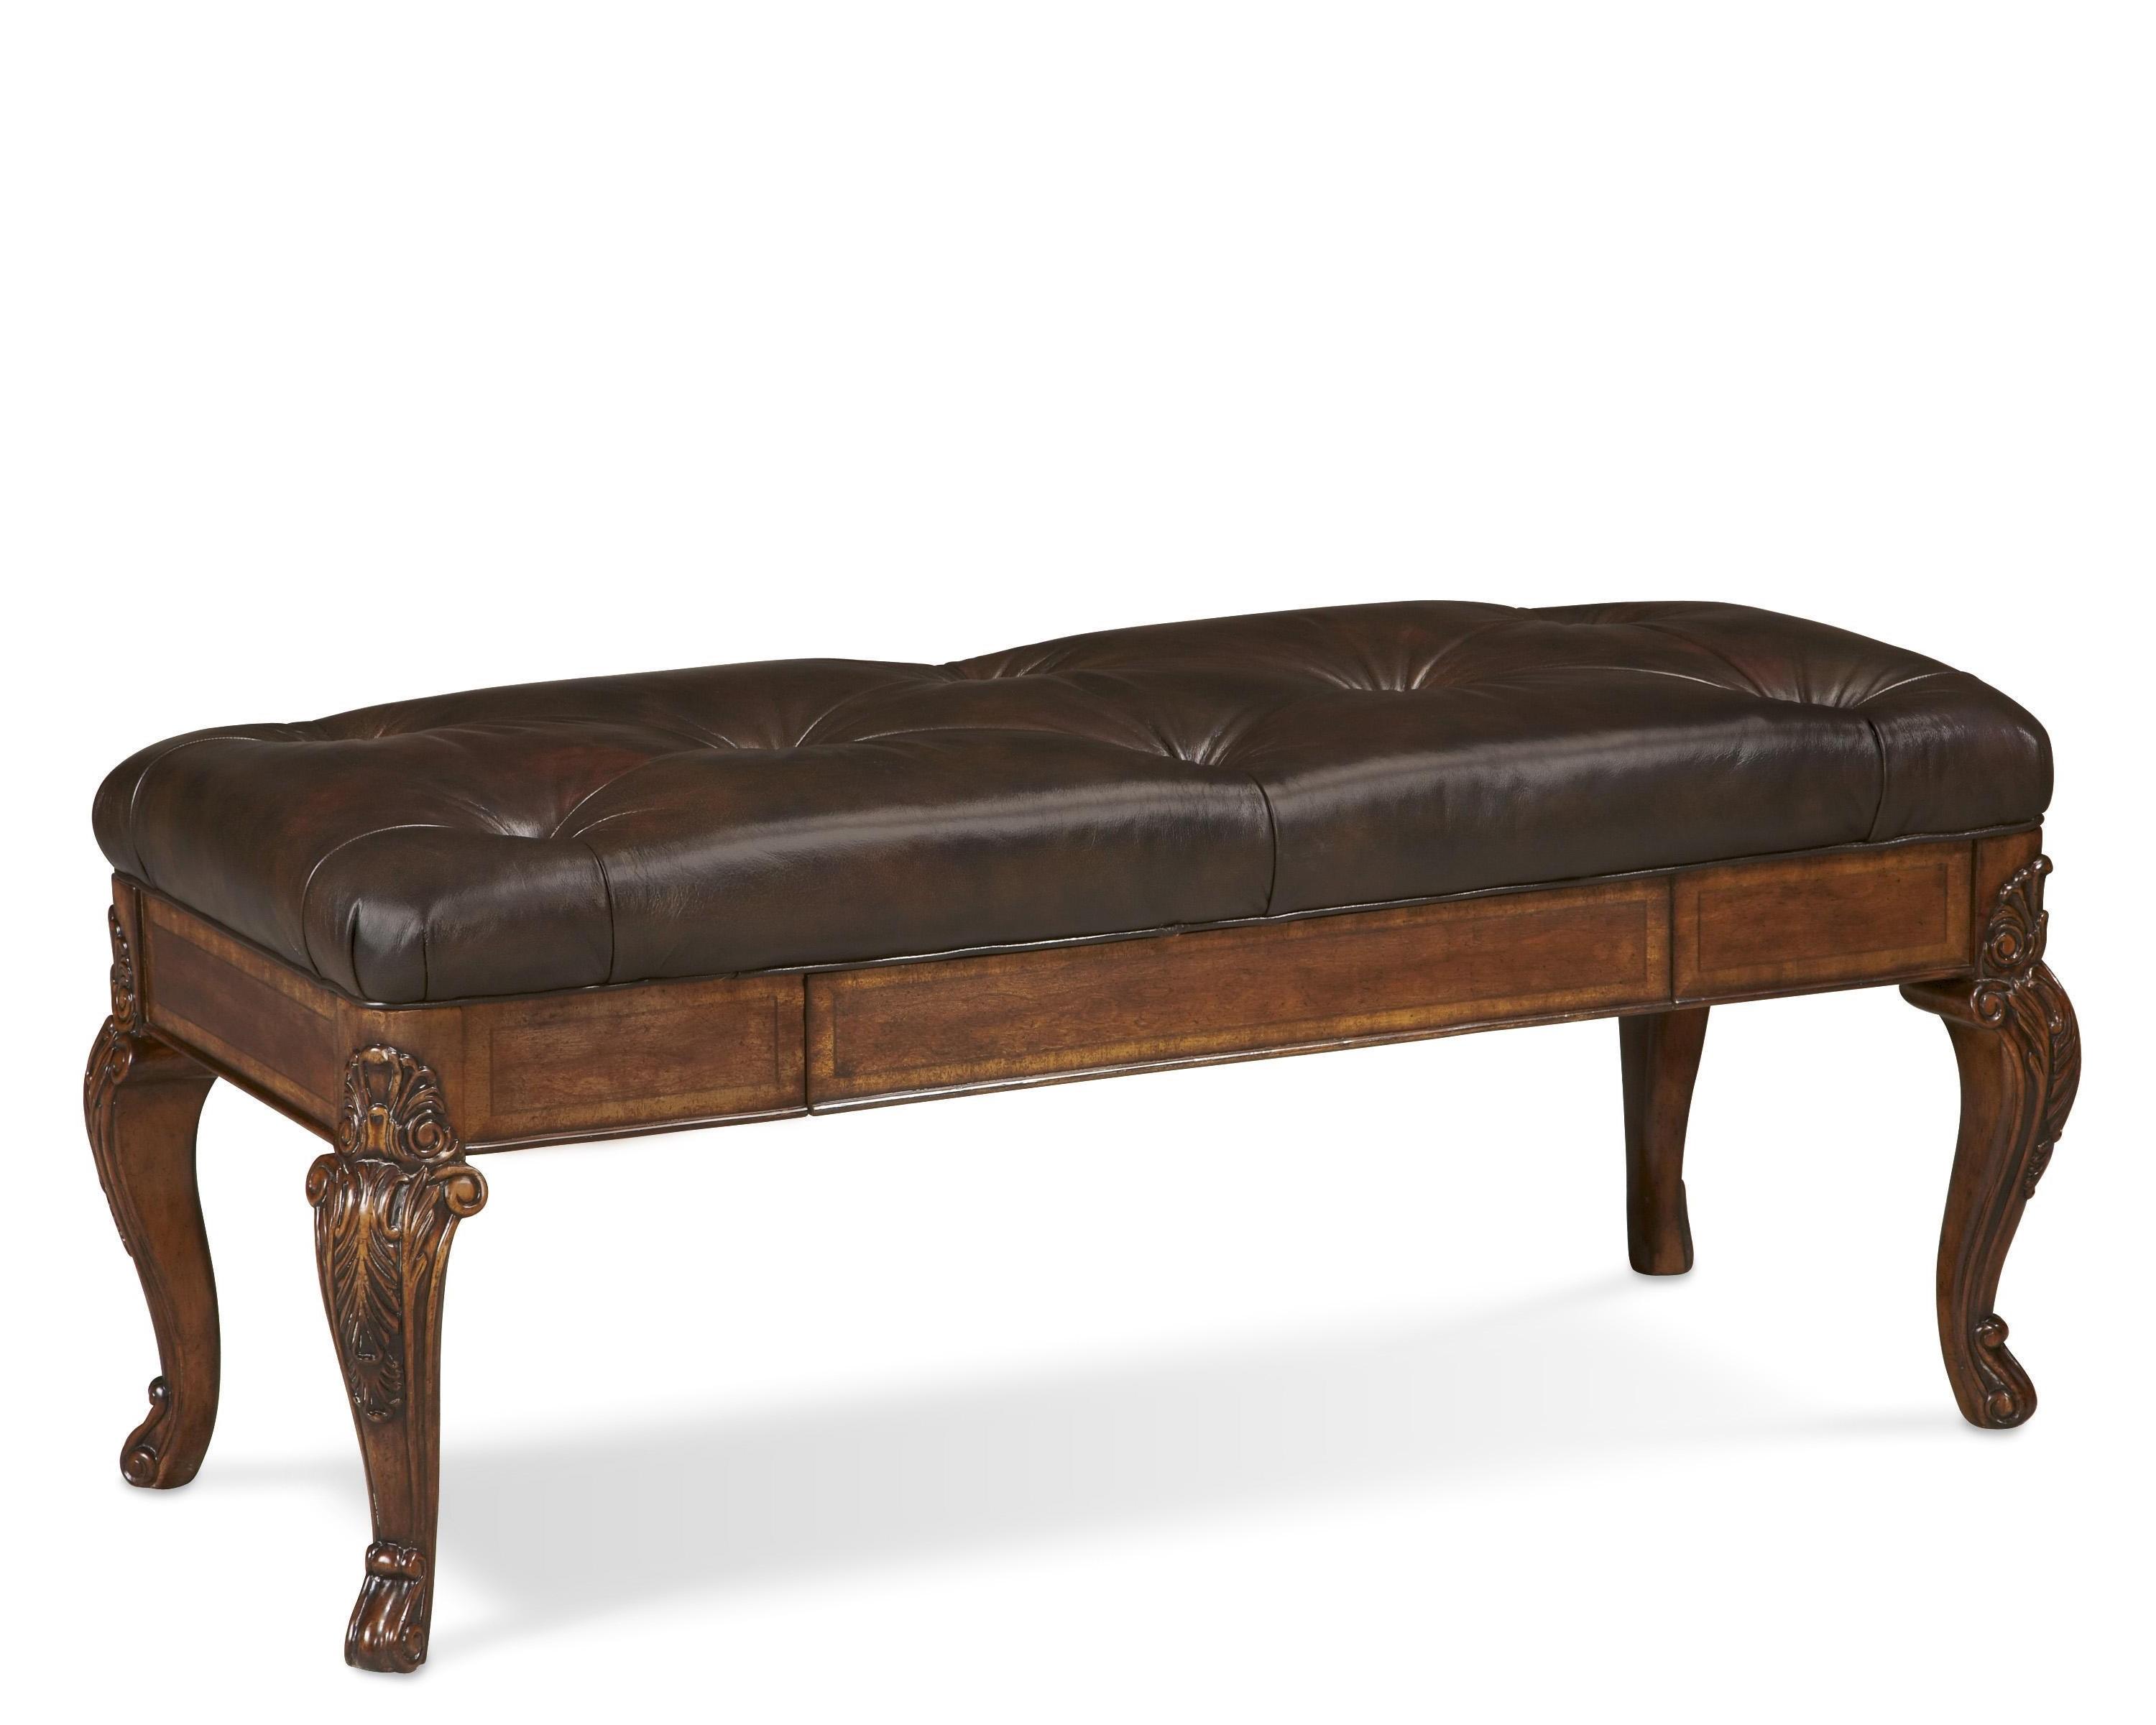 Classic, Traditional Bench Old World 143149-2606 in Cherry, Brown Leather